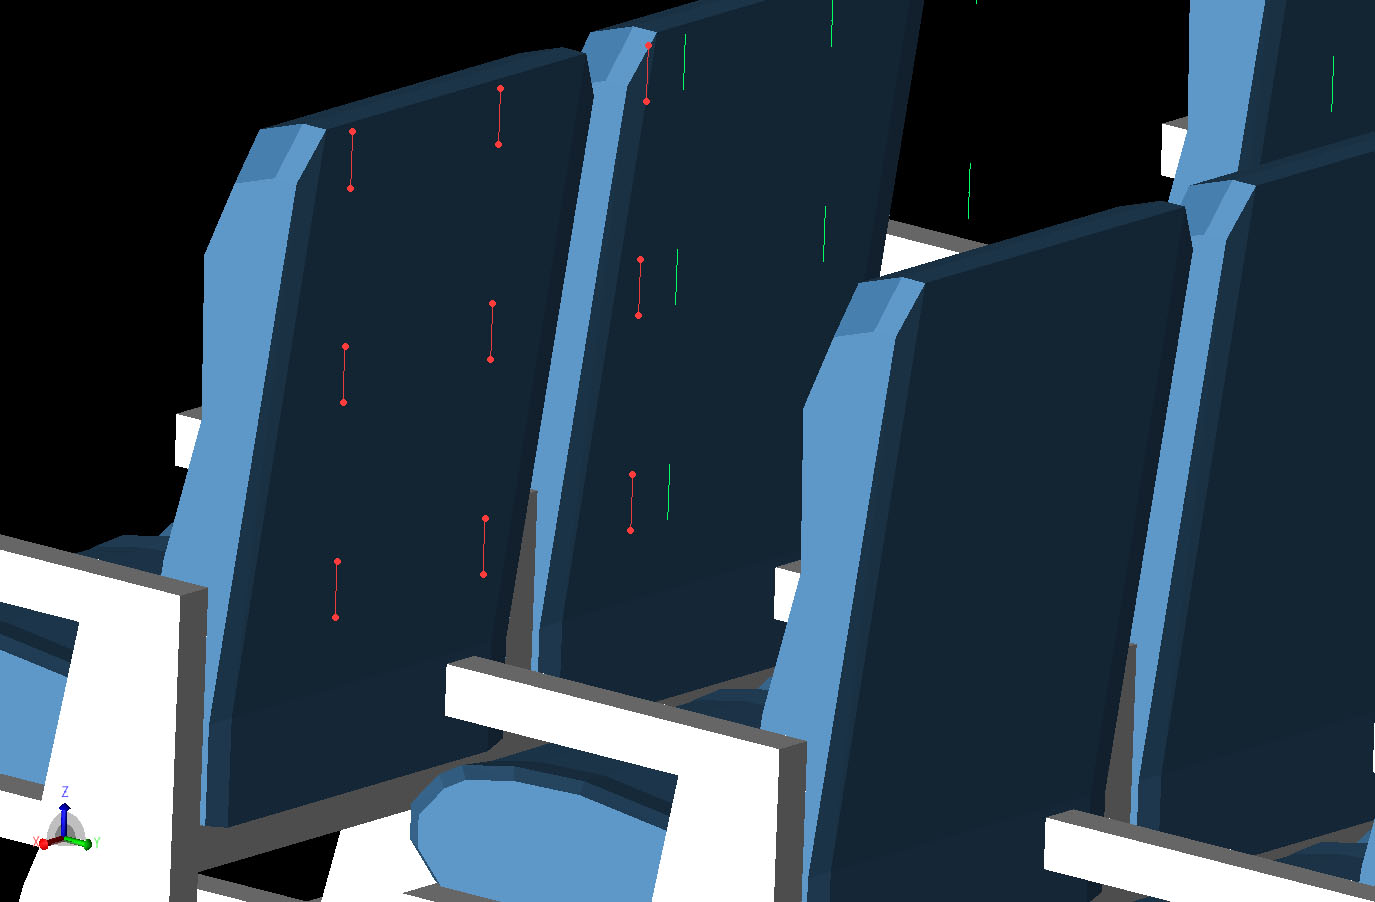 Figure 3The 3x3 grid of sensor locations defined as dipoles is shown behind one of the seat back locations. The sensor grids are located behind the seats in every other row of the cabin for the first three columns of seats.